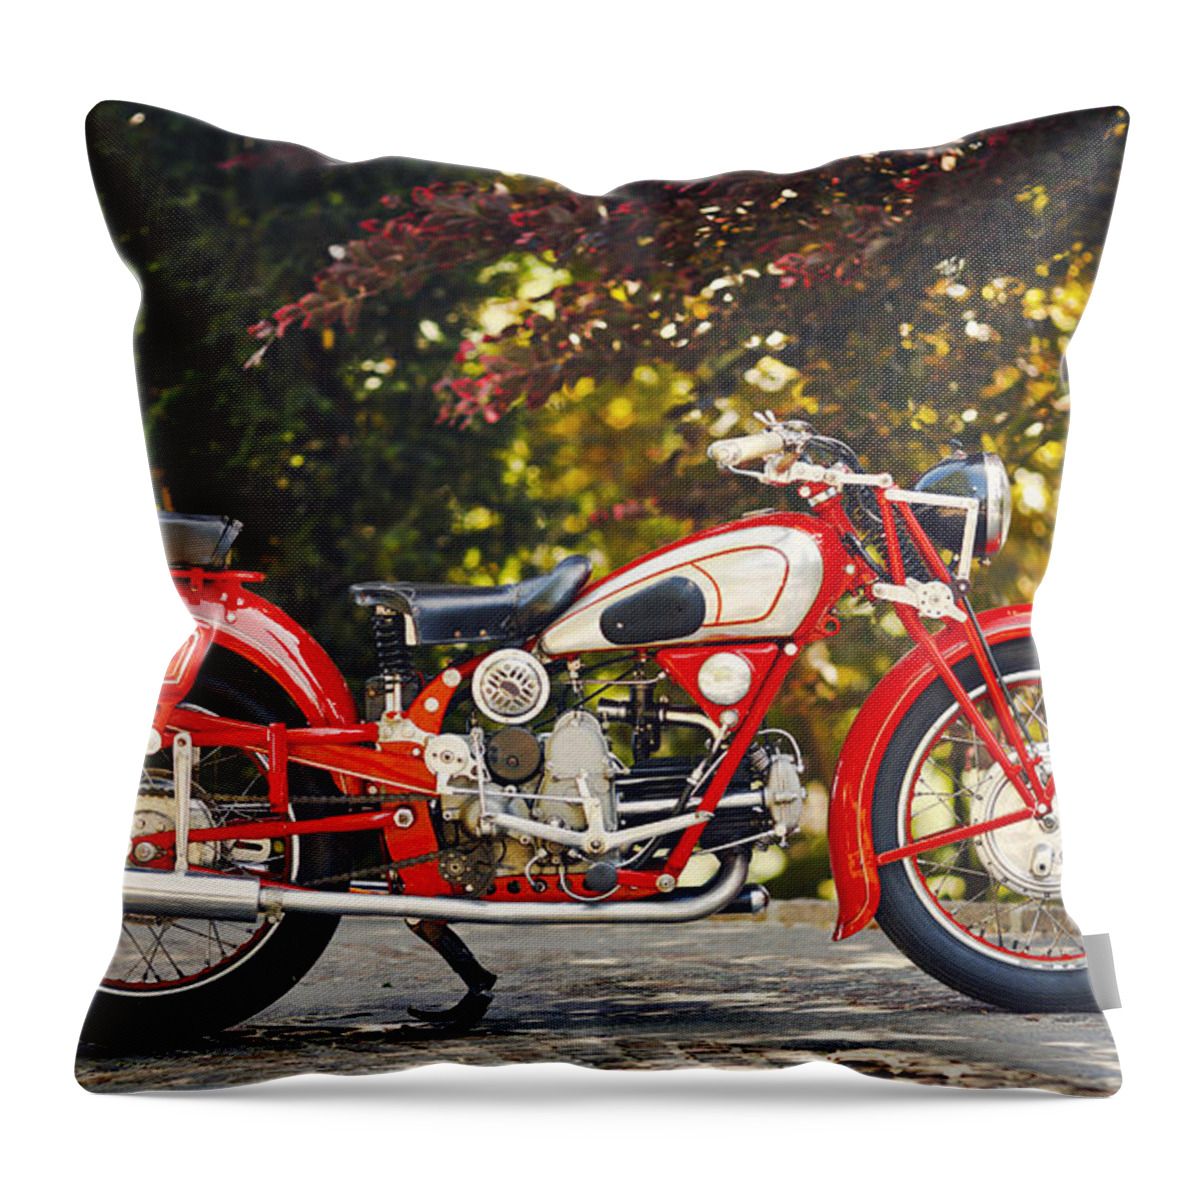 Engine Throw Pillow featuring the photograph Vintage Italian Motorcycle by Thepalmer